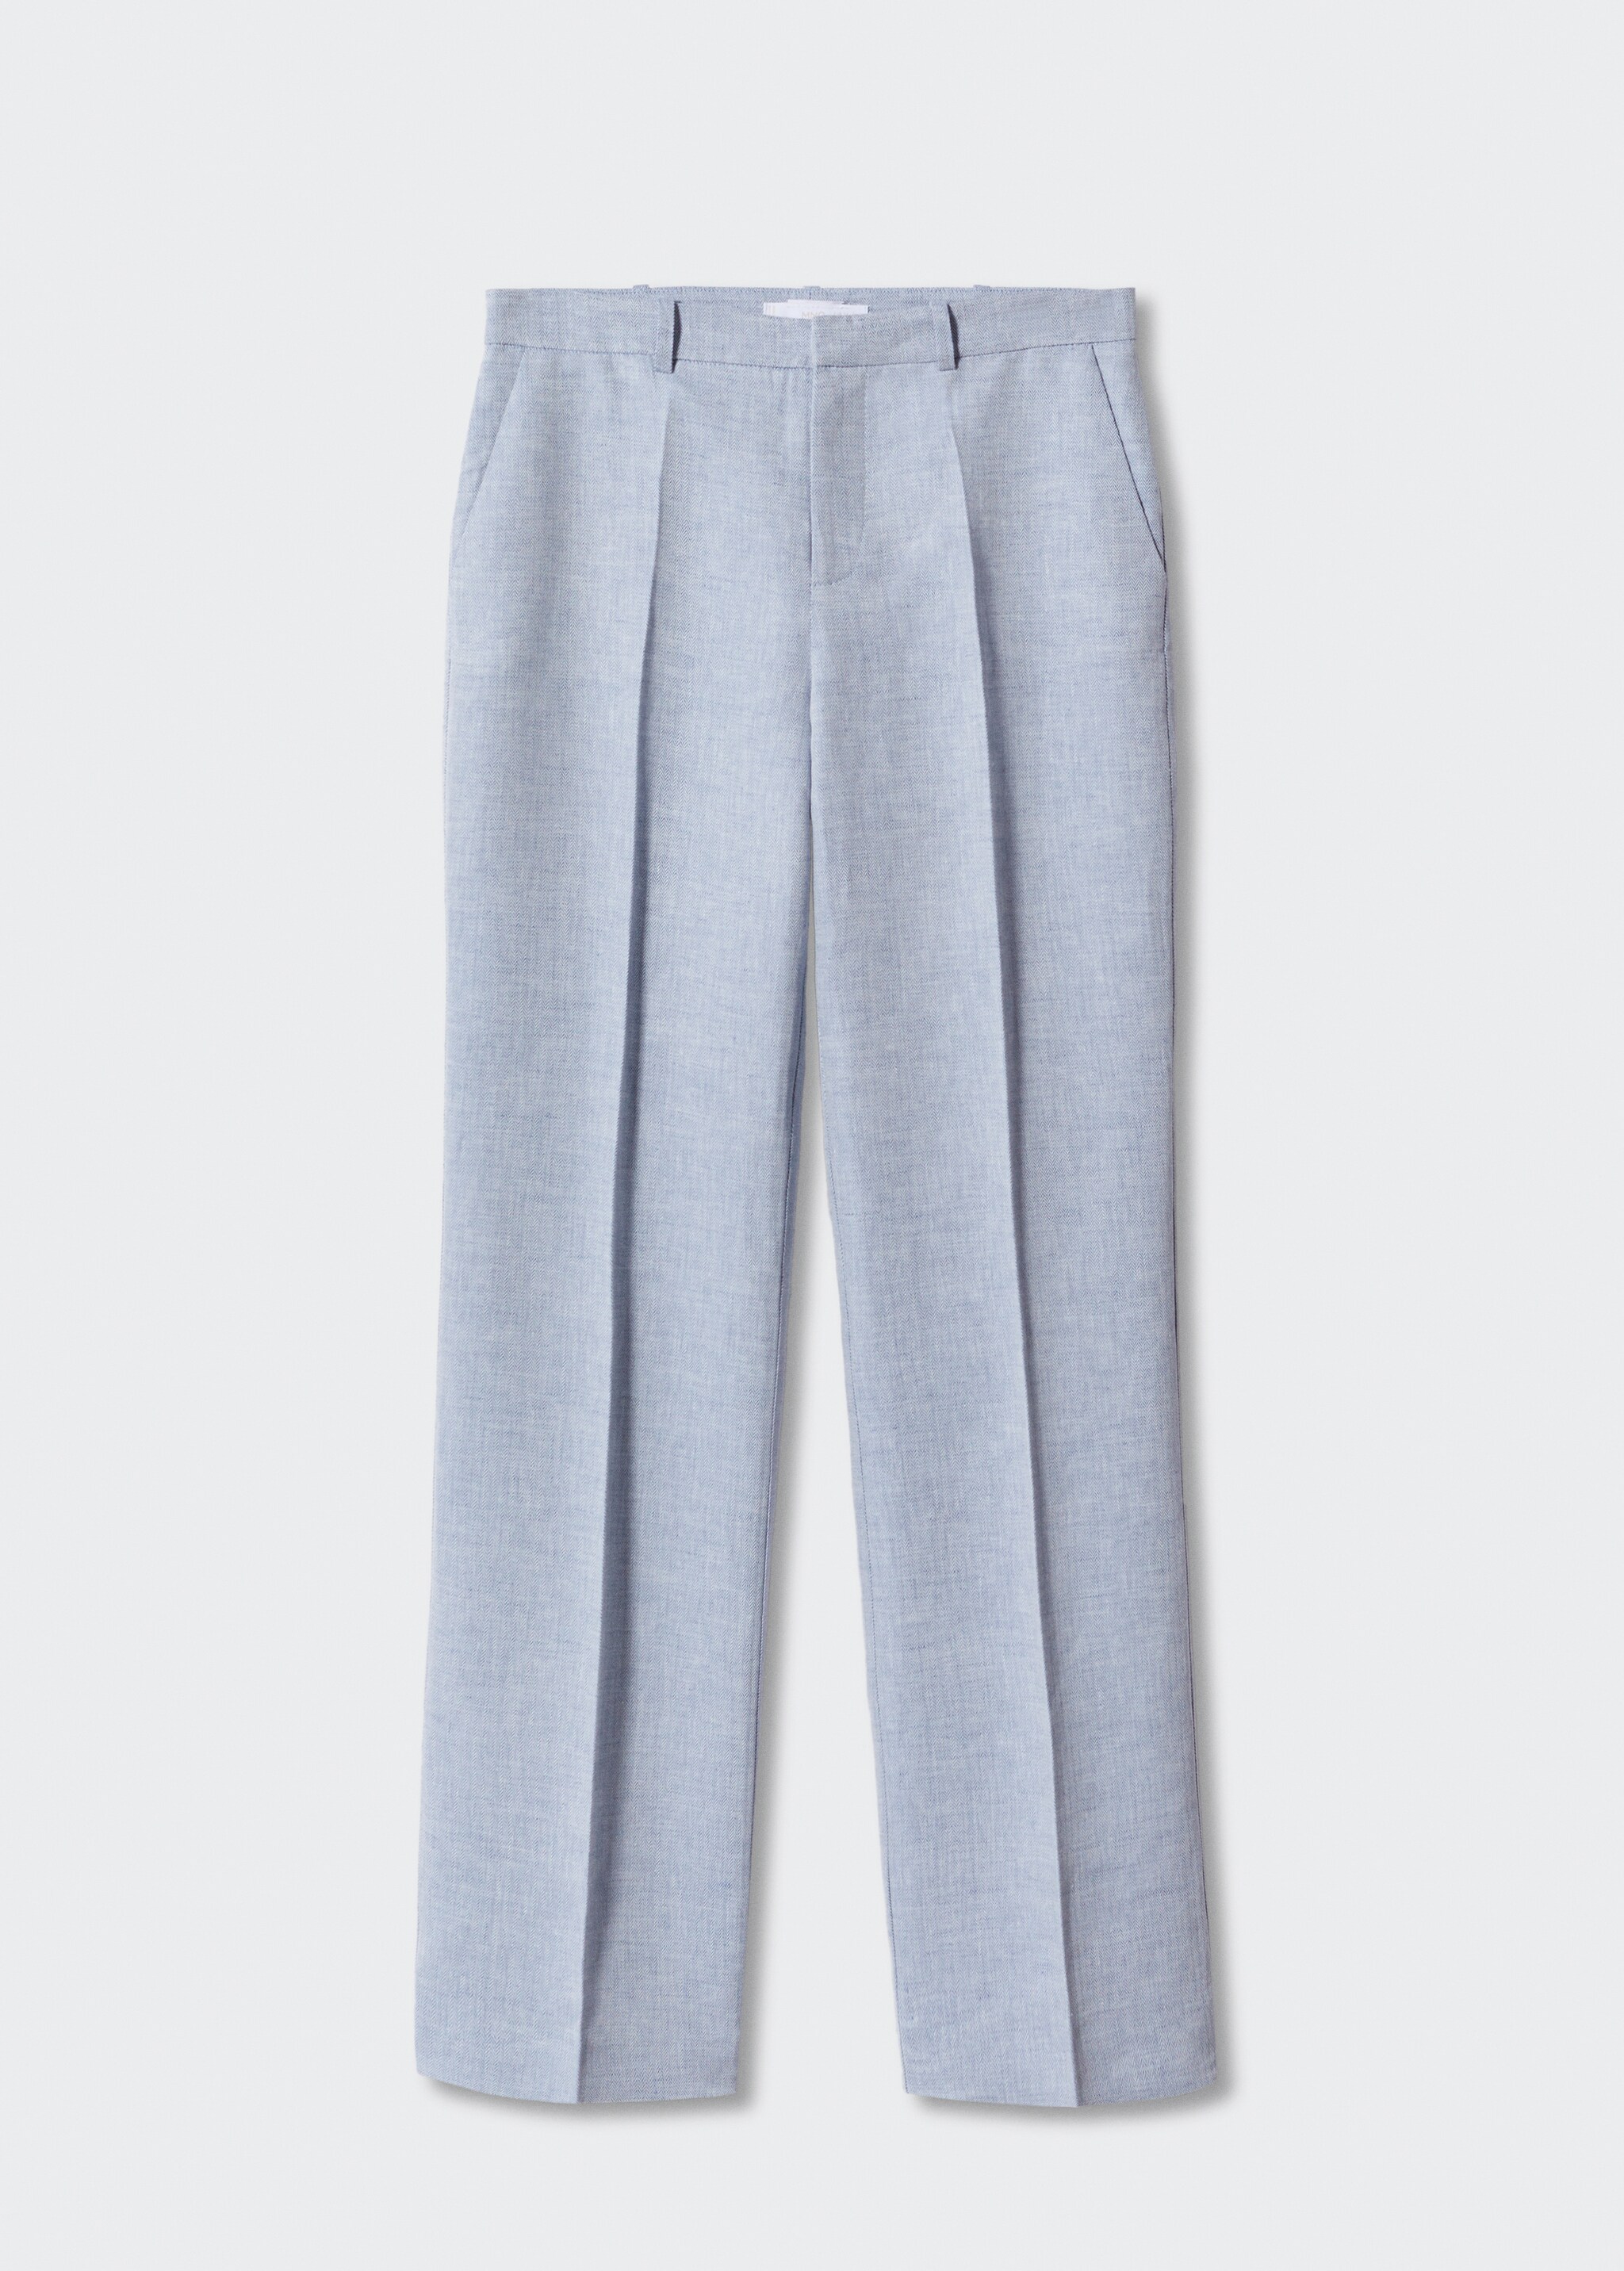 Textured linen trousers - Article without model